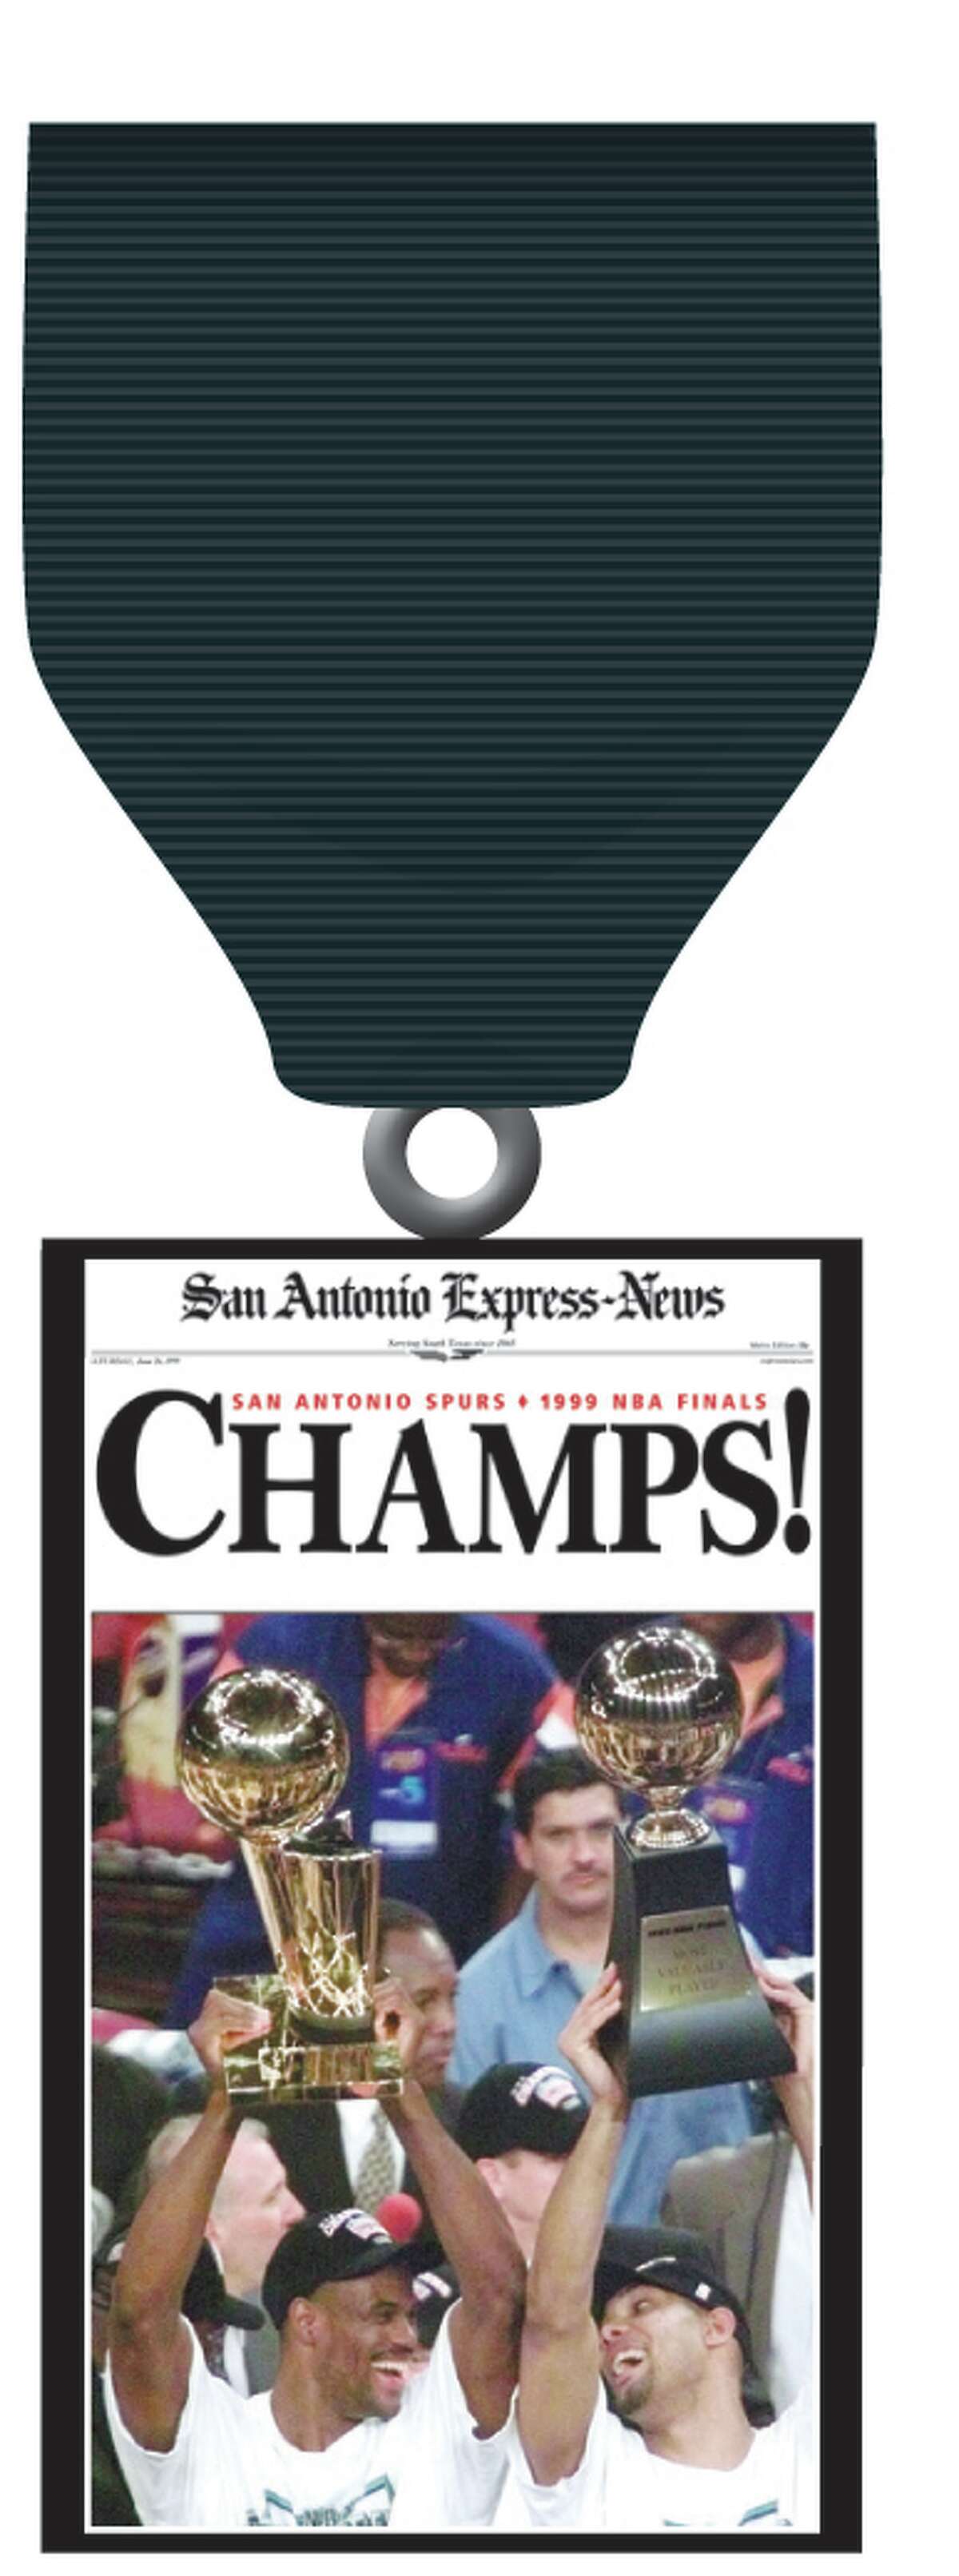 The San Antonio Express-News Commemorative Front Page Spurs Championship Medal for the 1999 Spurs championship.